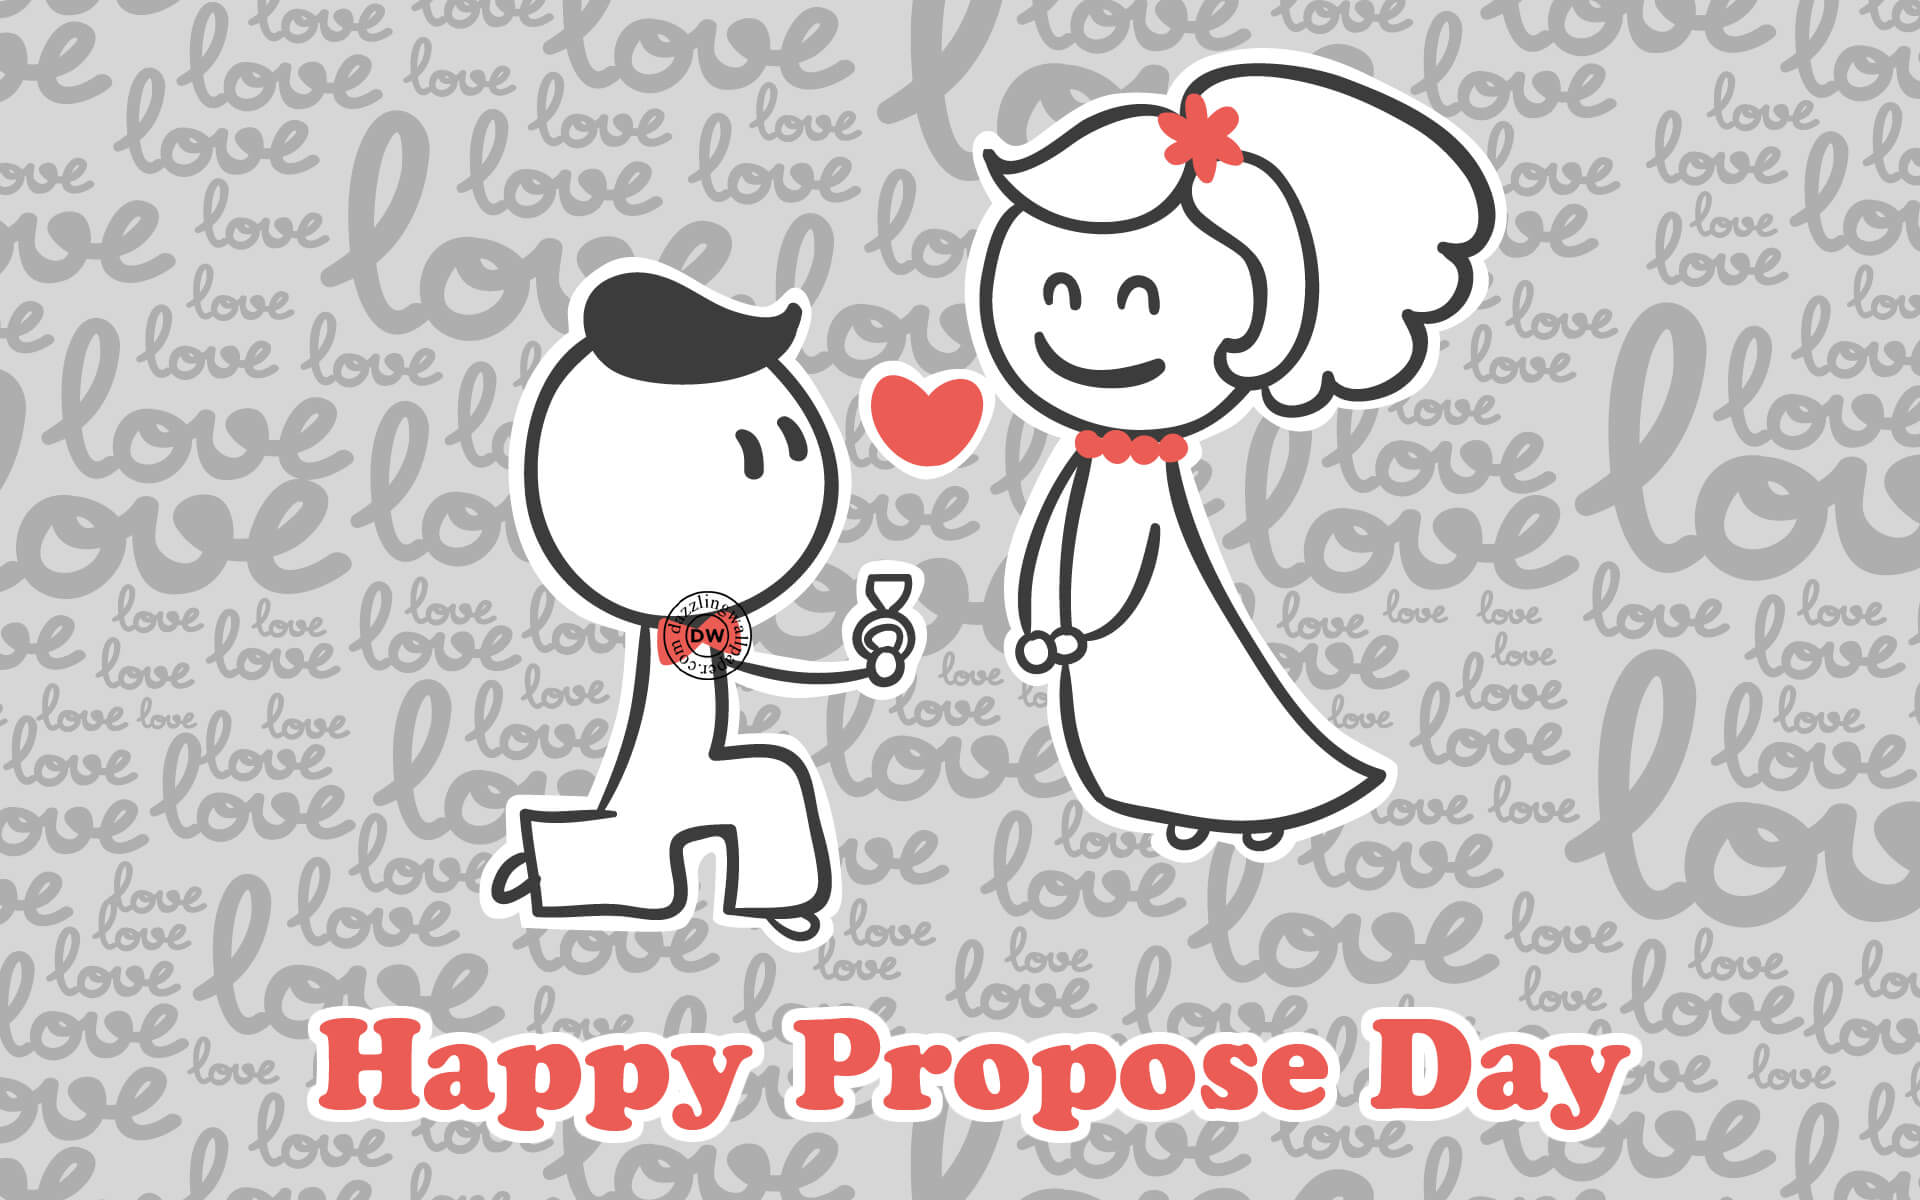 Romantic Couple Clipart Hd PNG, Cartoon Couple Boy Proposing To Girl  Romantic Scene, Cartoon, Lovely, Hand Painted PNG Image For Free Download